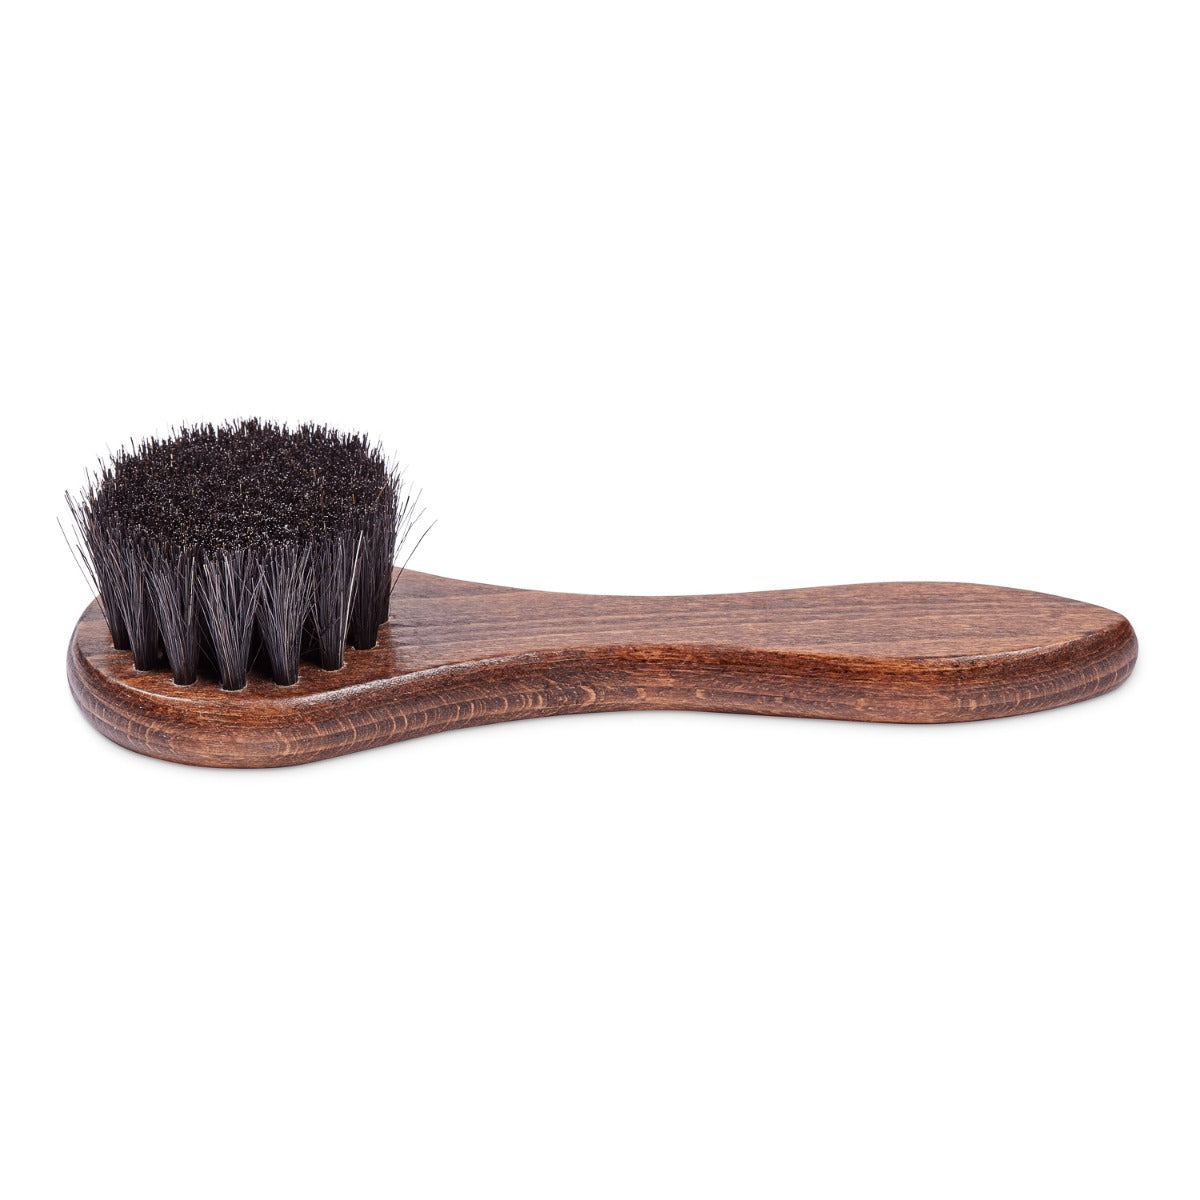 An Extra-Large Shoe Cleaning Dauber with black bristles from KirbyAllison.com.